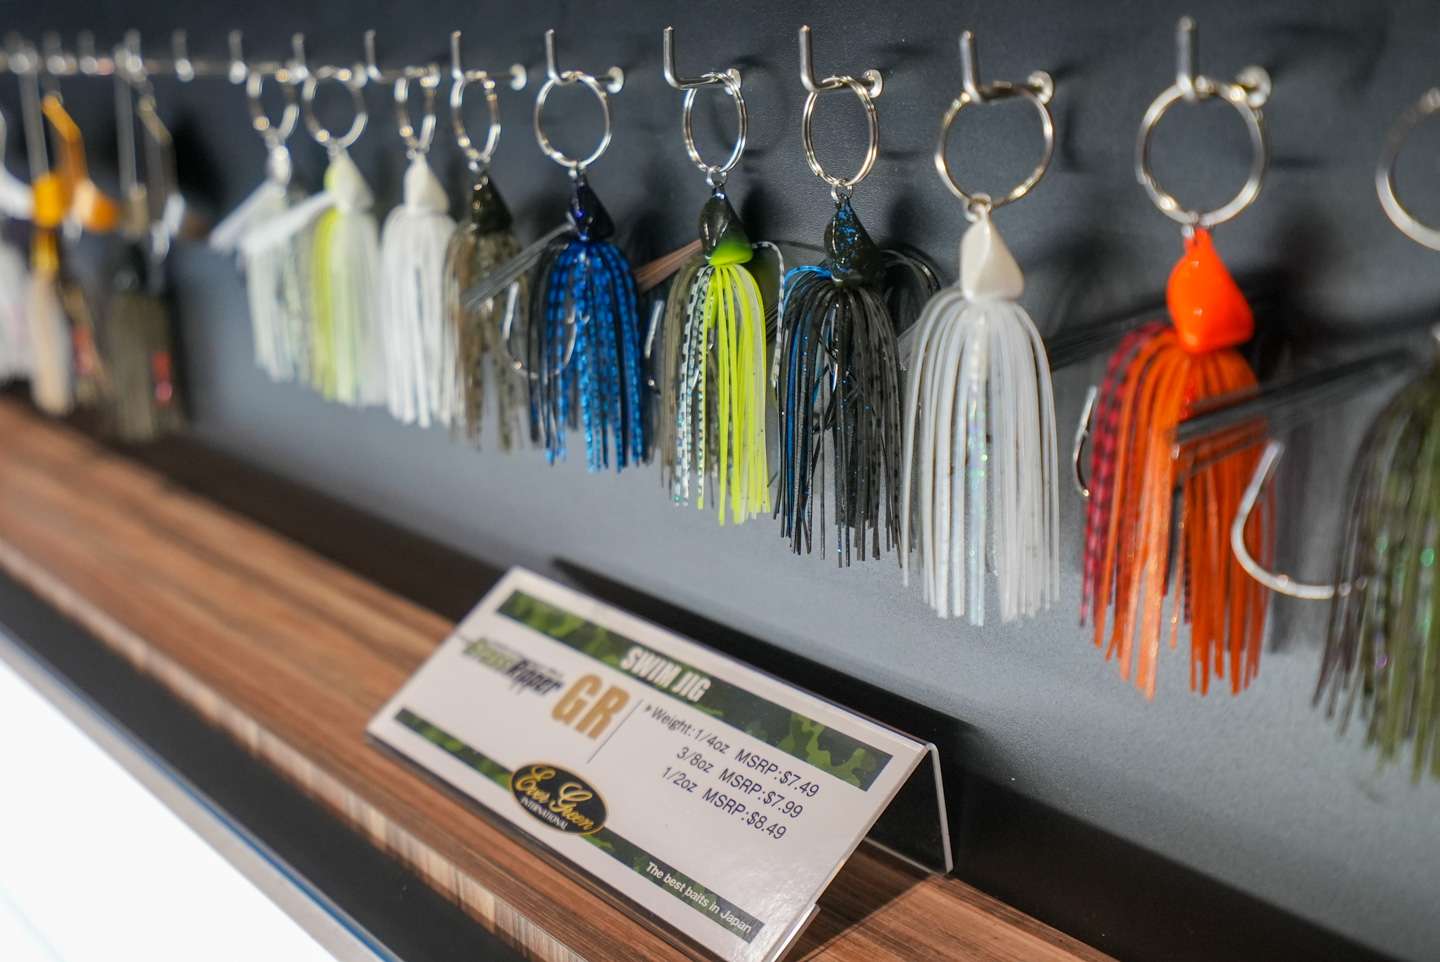 <b>Evergreen Grass Ripper Swim Jig</b><br>
As great as the Z-Man Evergreen JackHammer is, there are certainly times that a swim jig is more applicable and that is why Evergreen developed the Grass Ripper swim jig. 